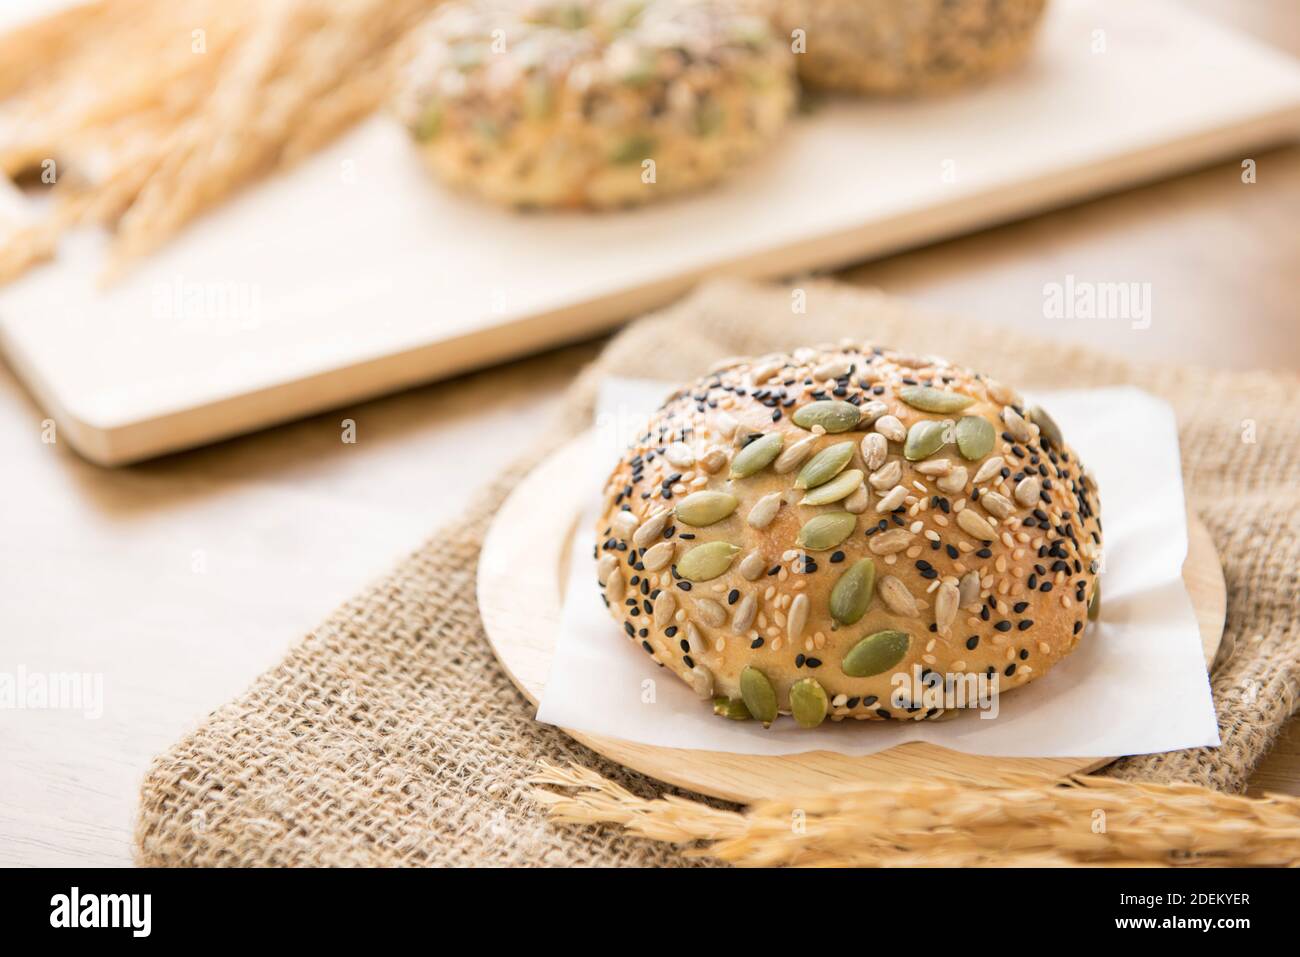 A healthy oven baked multigrain bread bun served on a wooden plate in a bakery Stock Photo